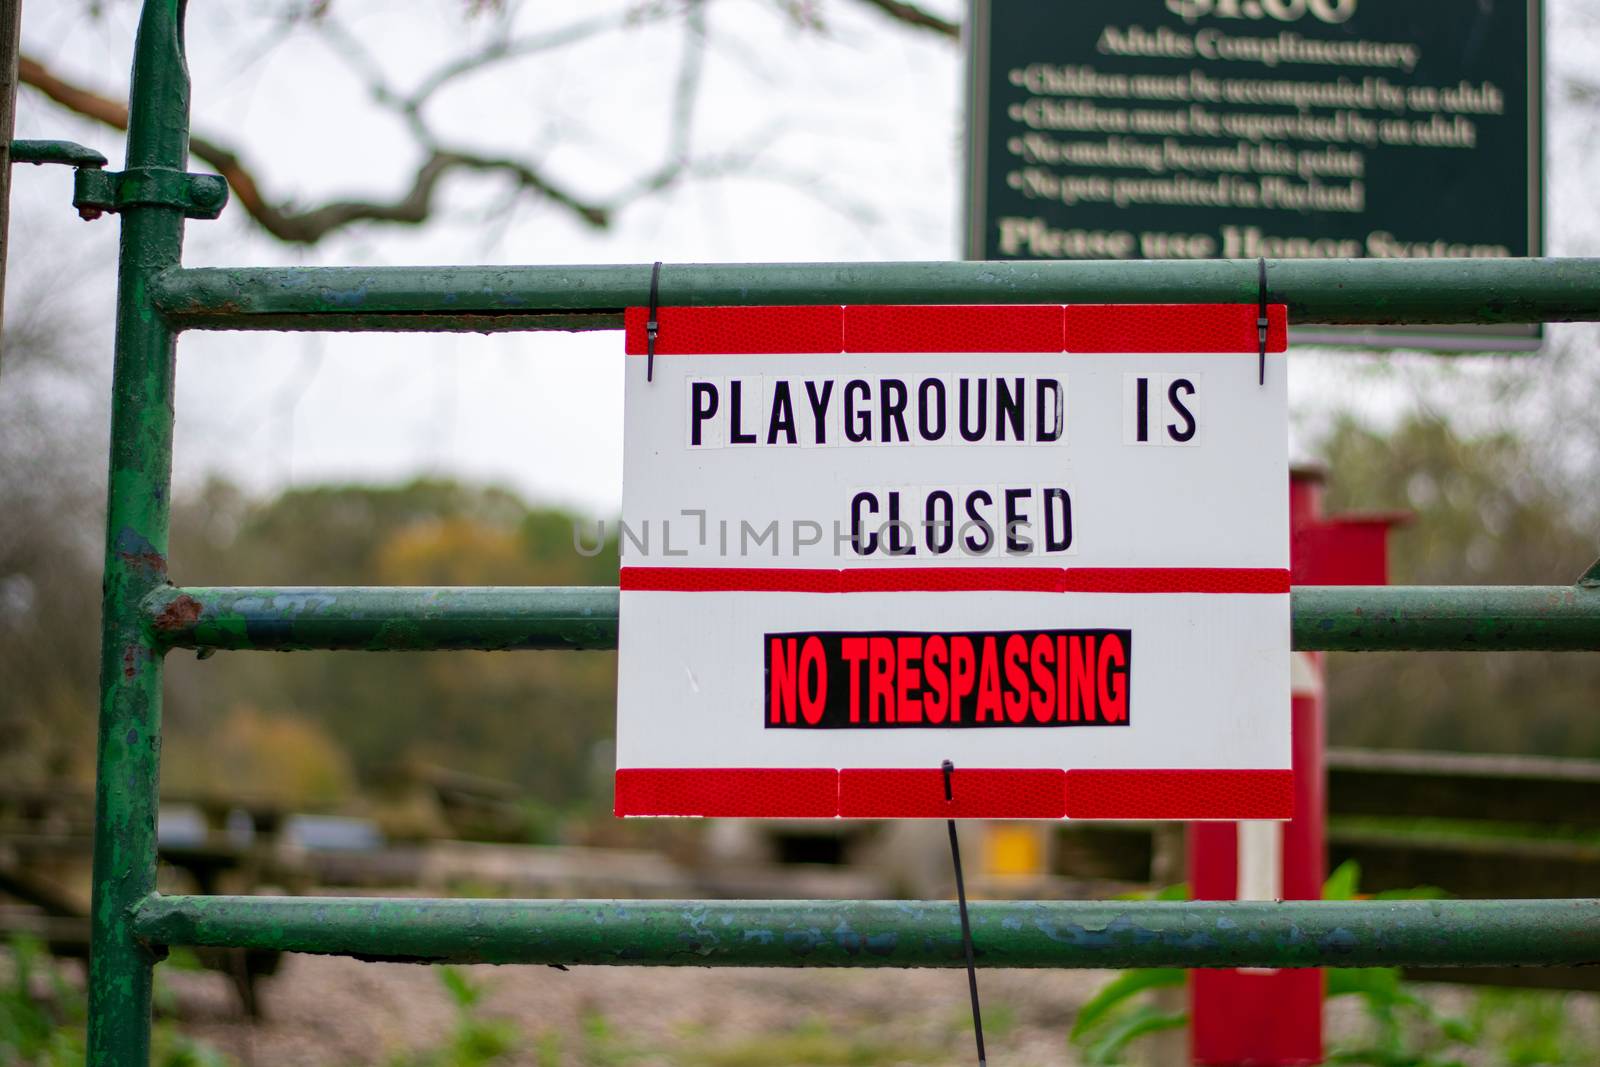 A Sign in Response to COVID-19 That Says the Playground is Closed and No Trespassing